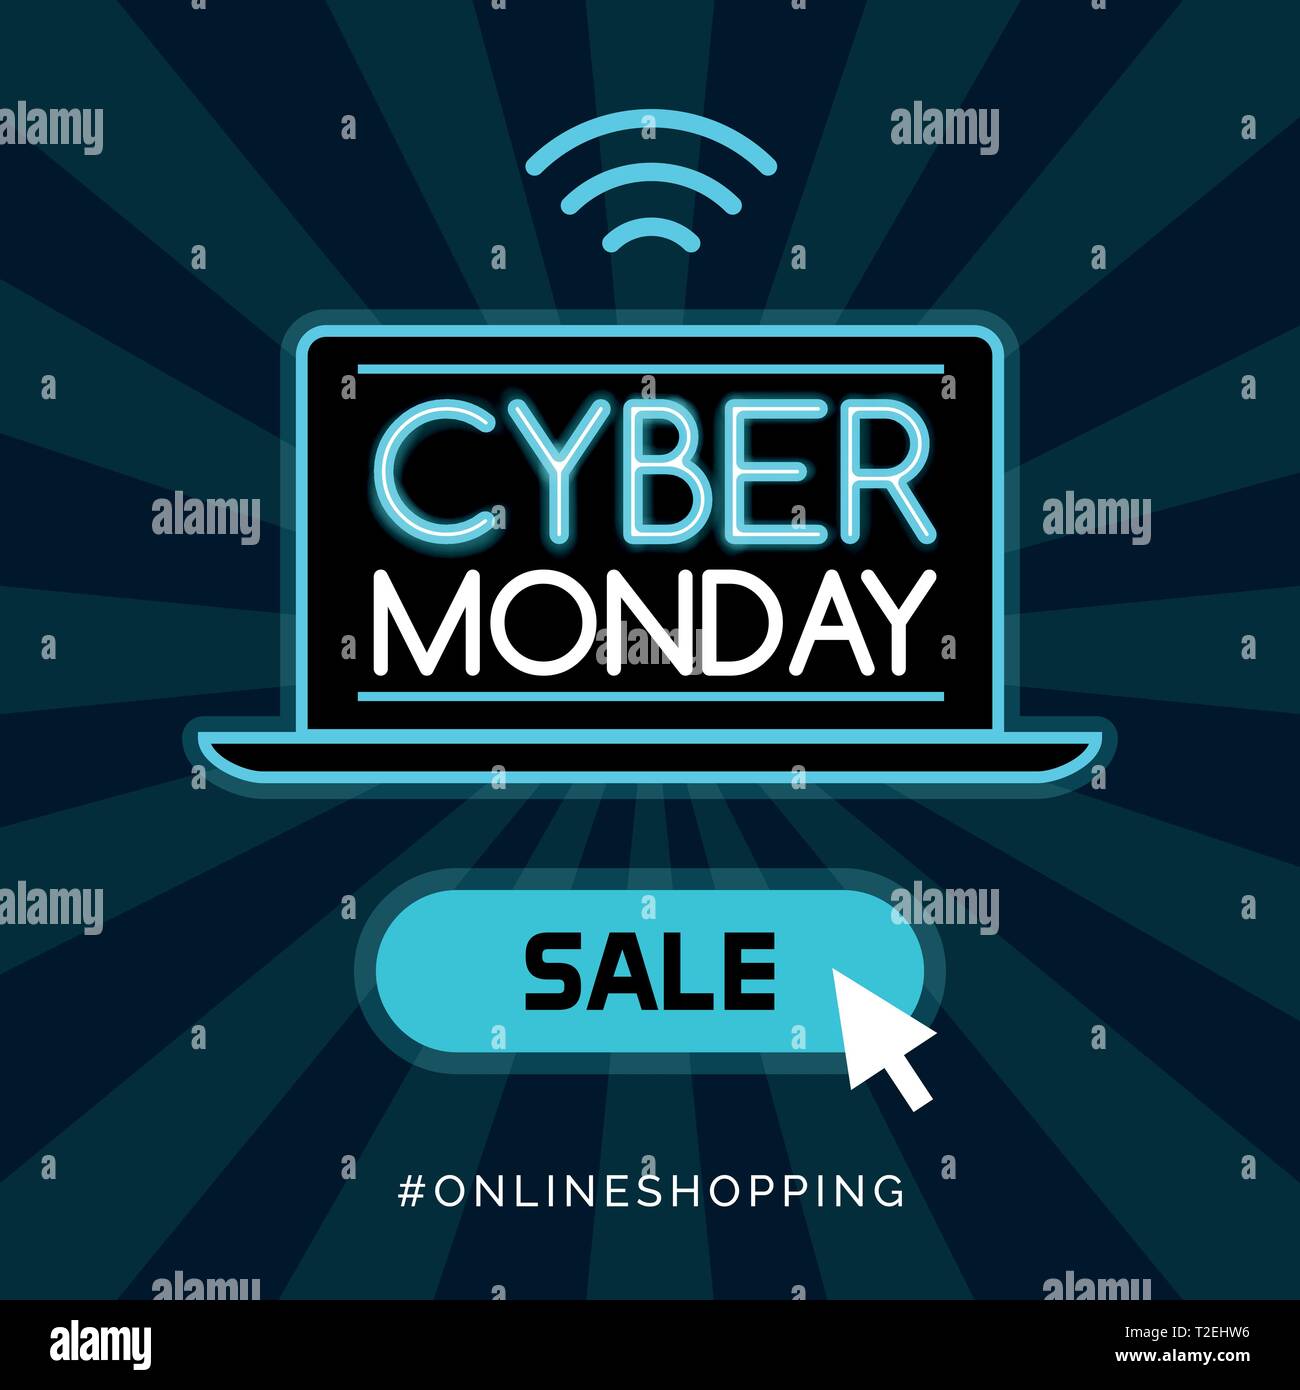 Cyber monday promotional sale advertisement and social media post design with laptop connecting Stock Vector